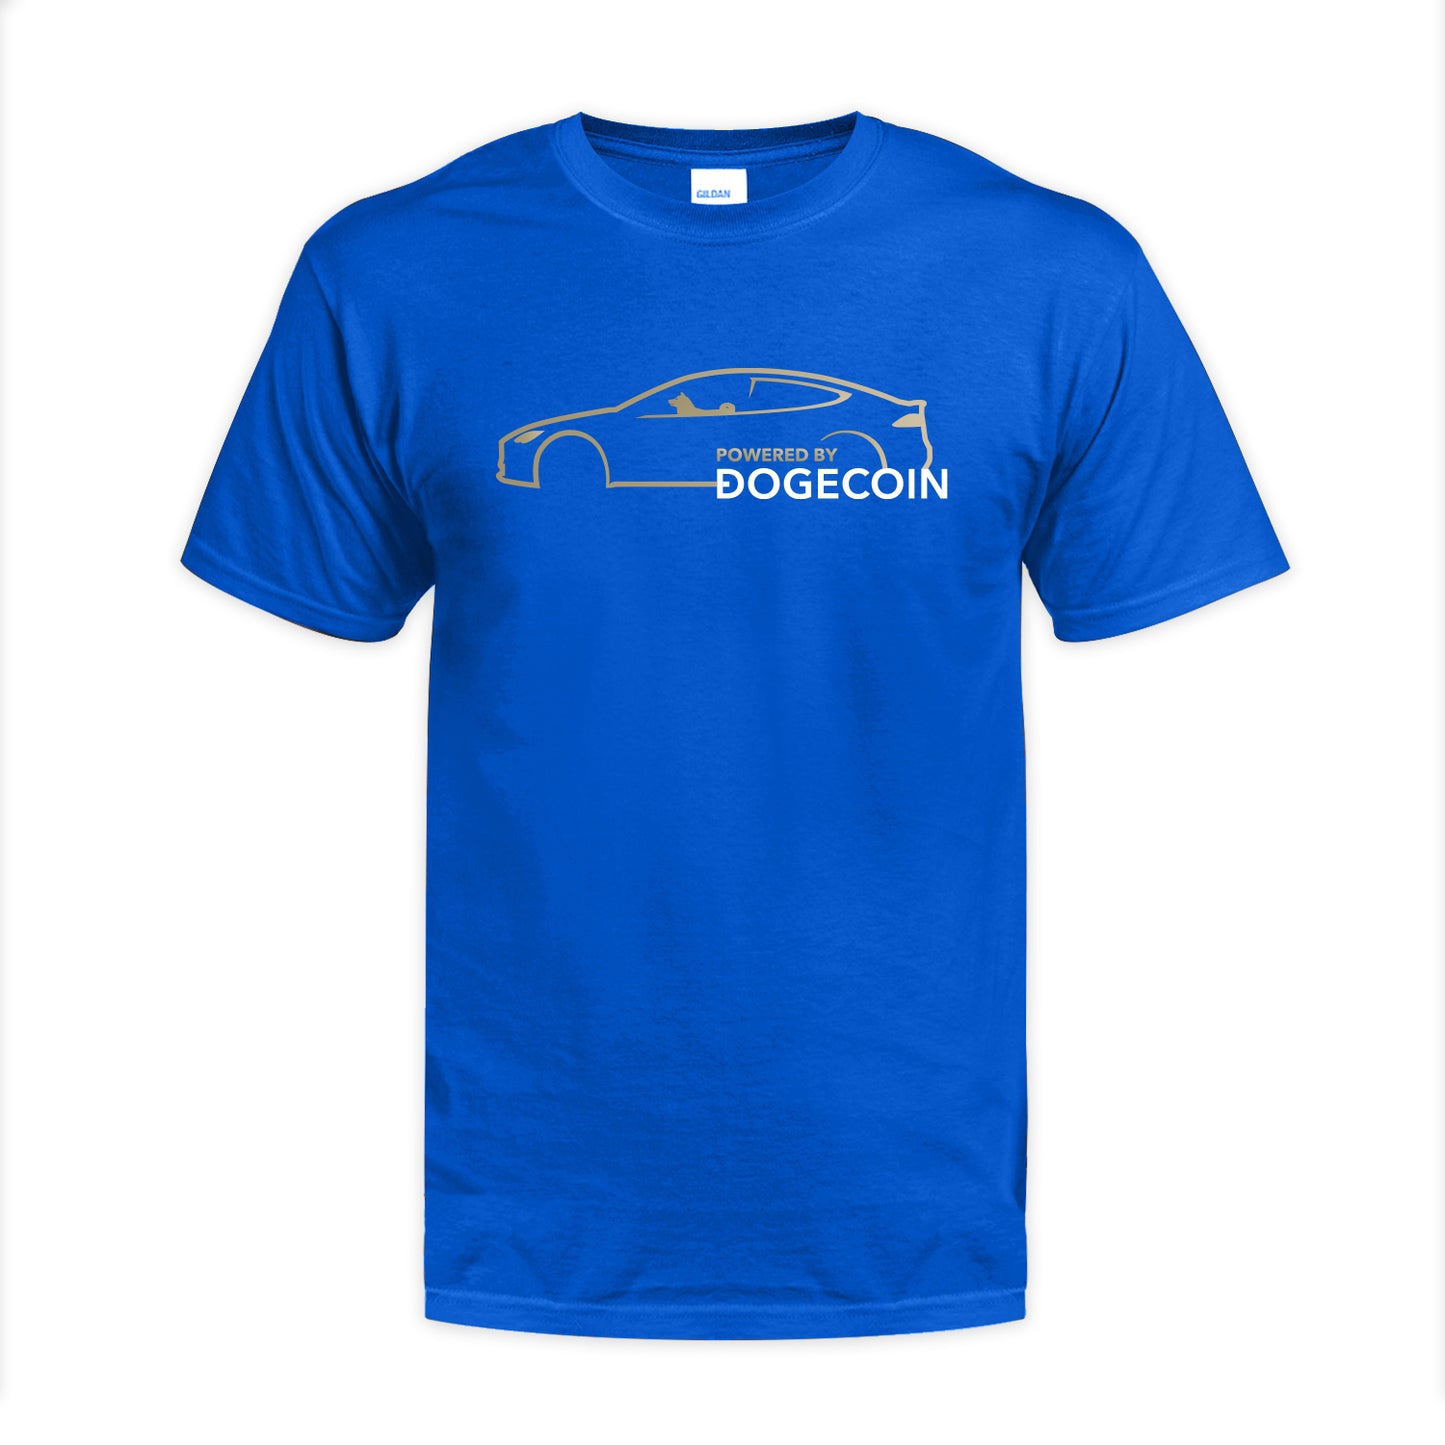 Powered By Dogecoin Model S Inspired Silhouette T-Shirt